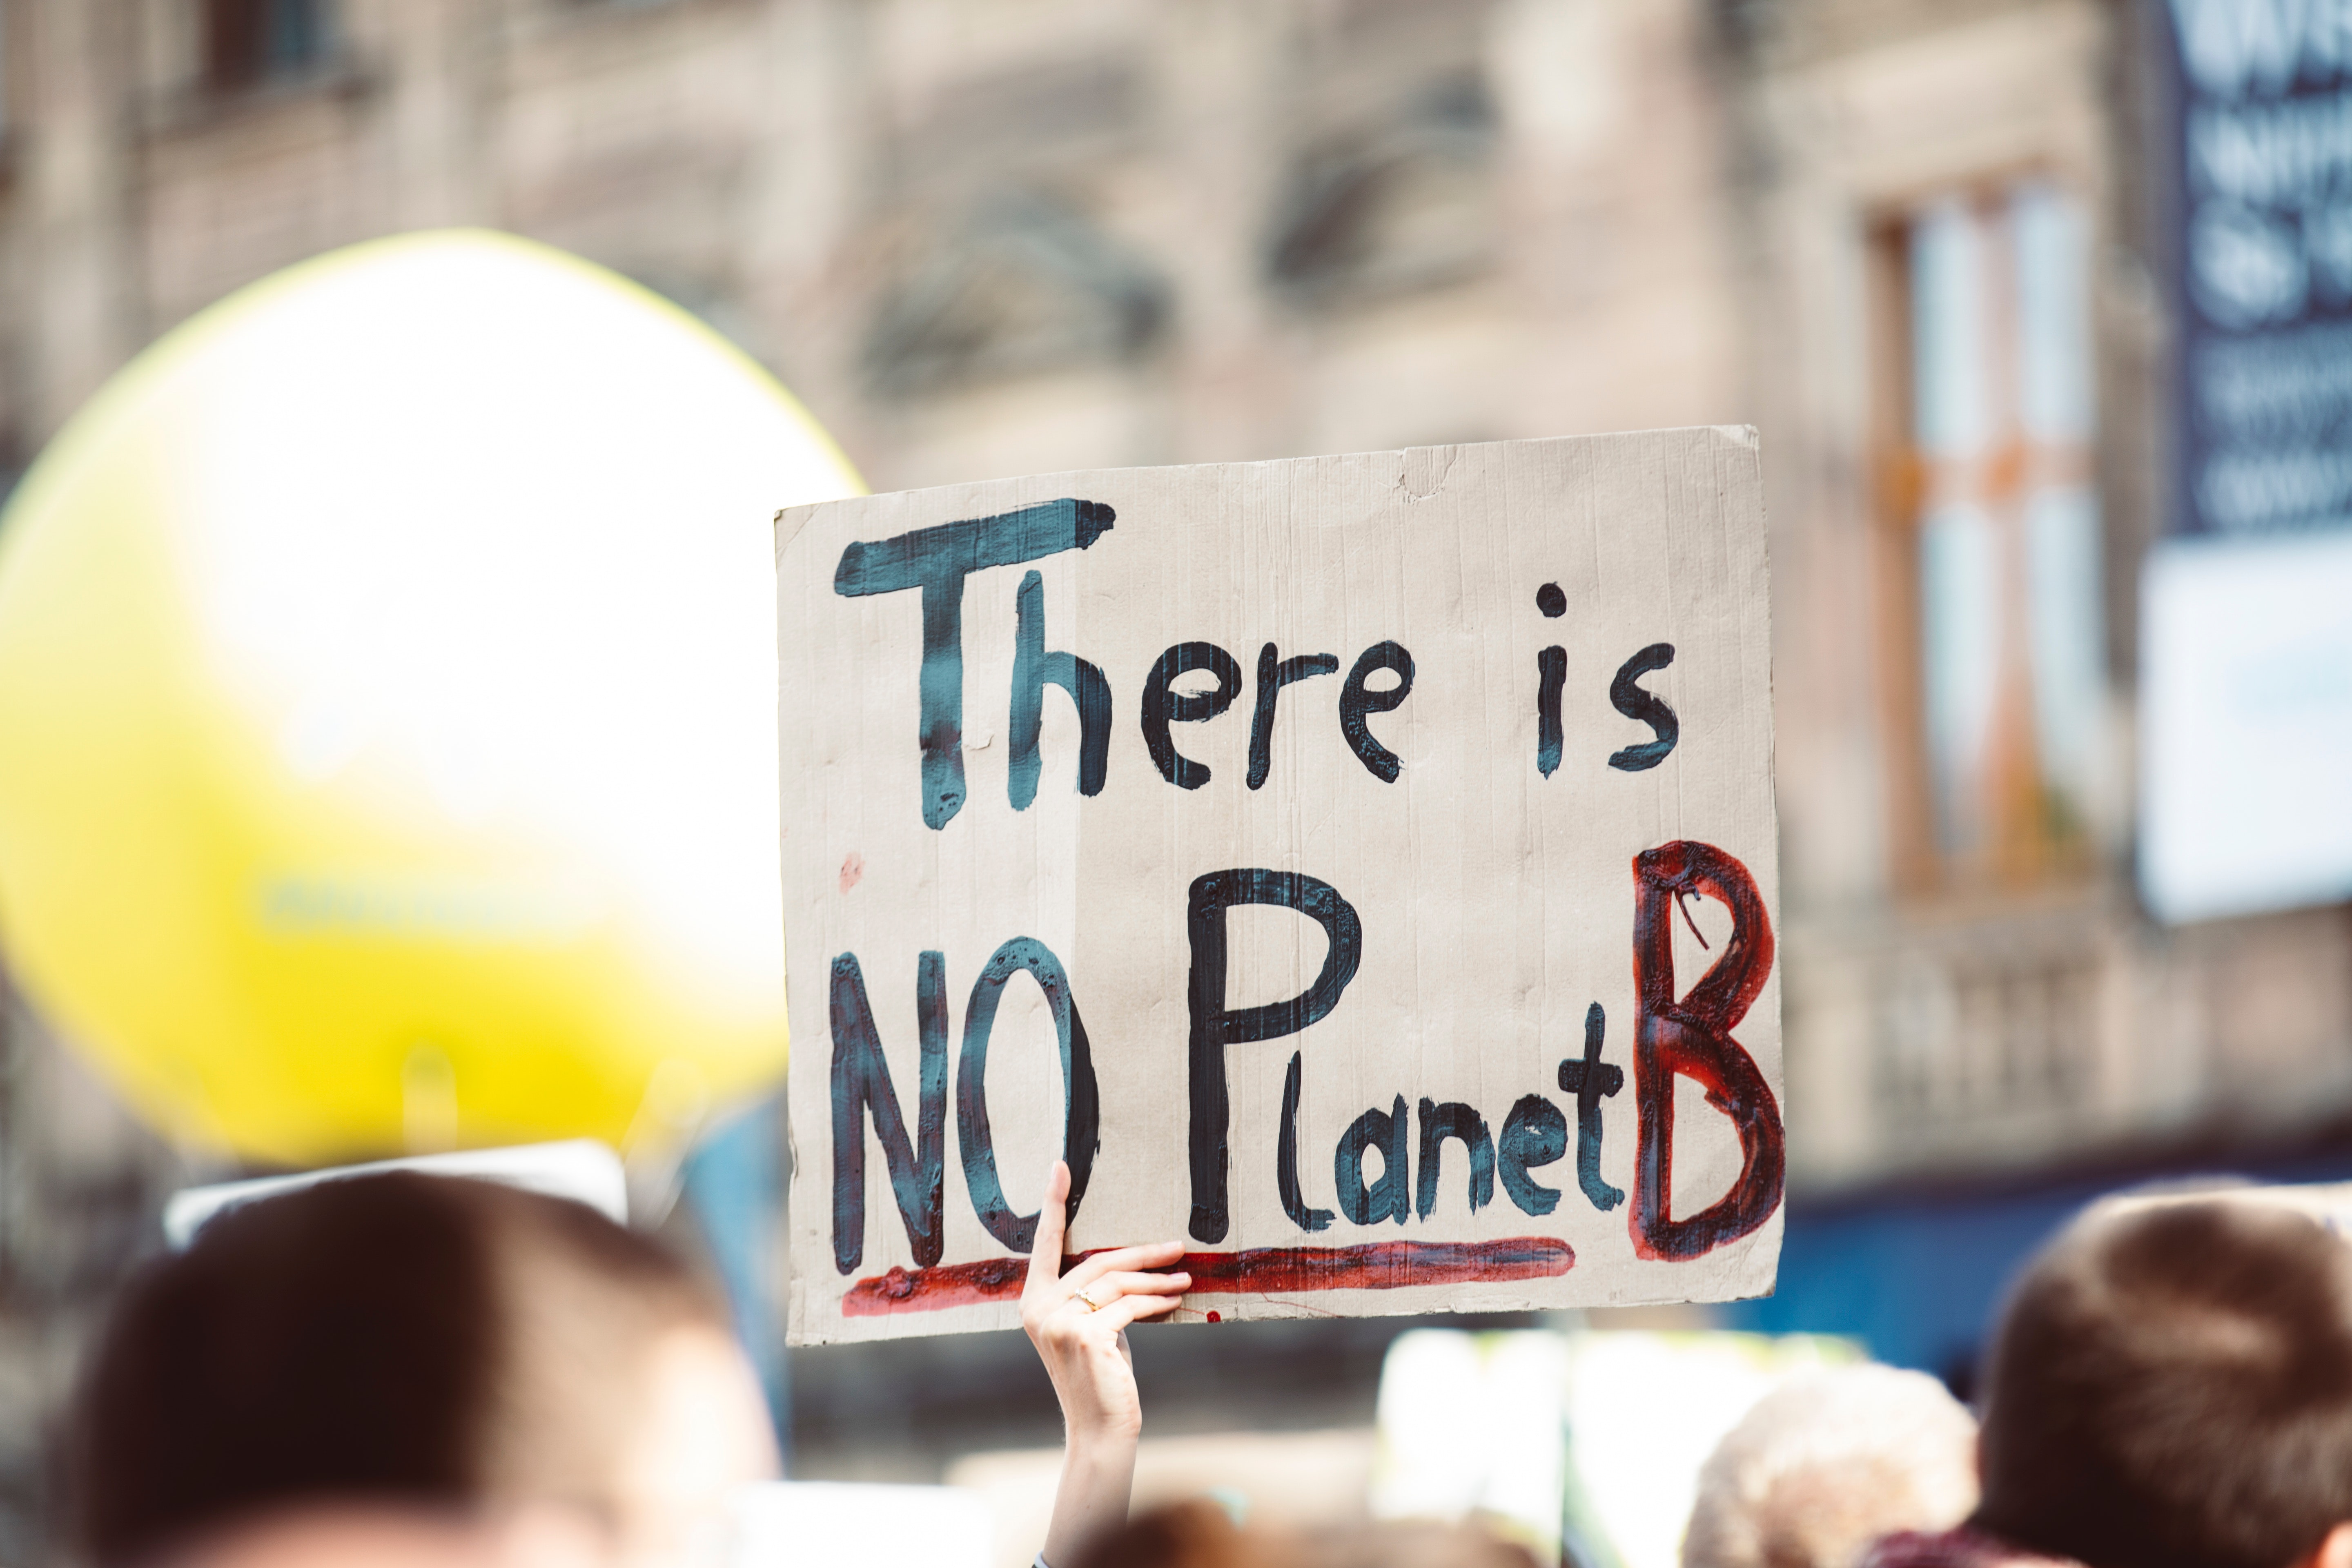 Picture of what seems to be a street demonstration with sign that reads 'There is No Planet B'